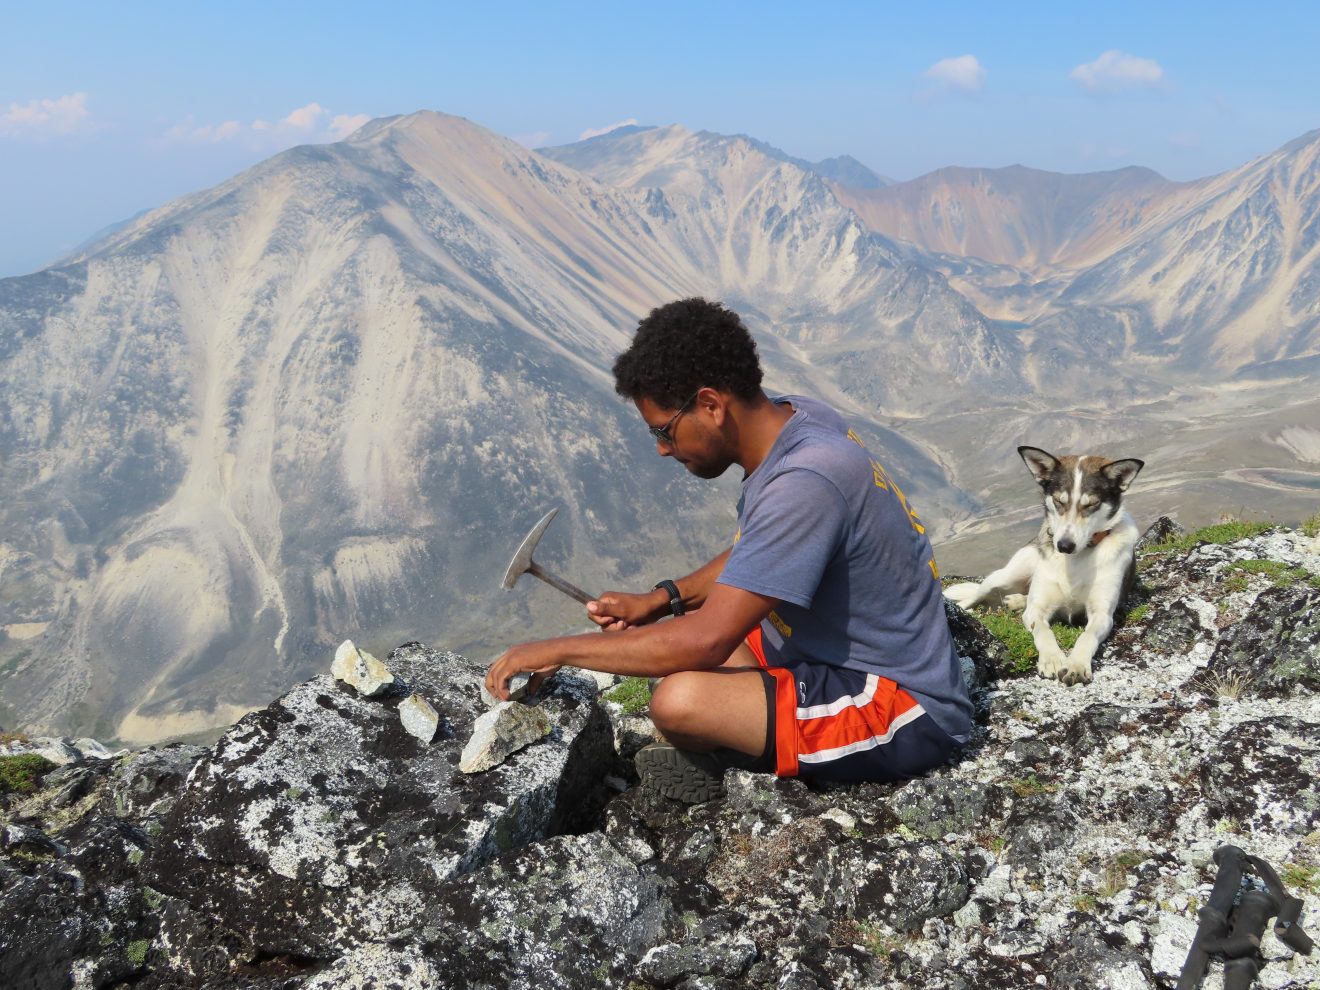 A man sits on a rocky ridge with a small hammer for a rock specimen. He is in the mountains. A dog sits behind him.